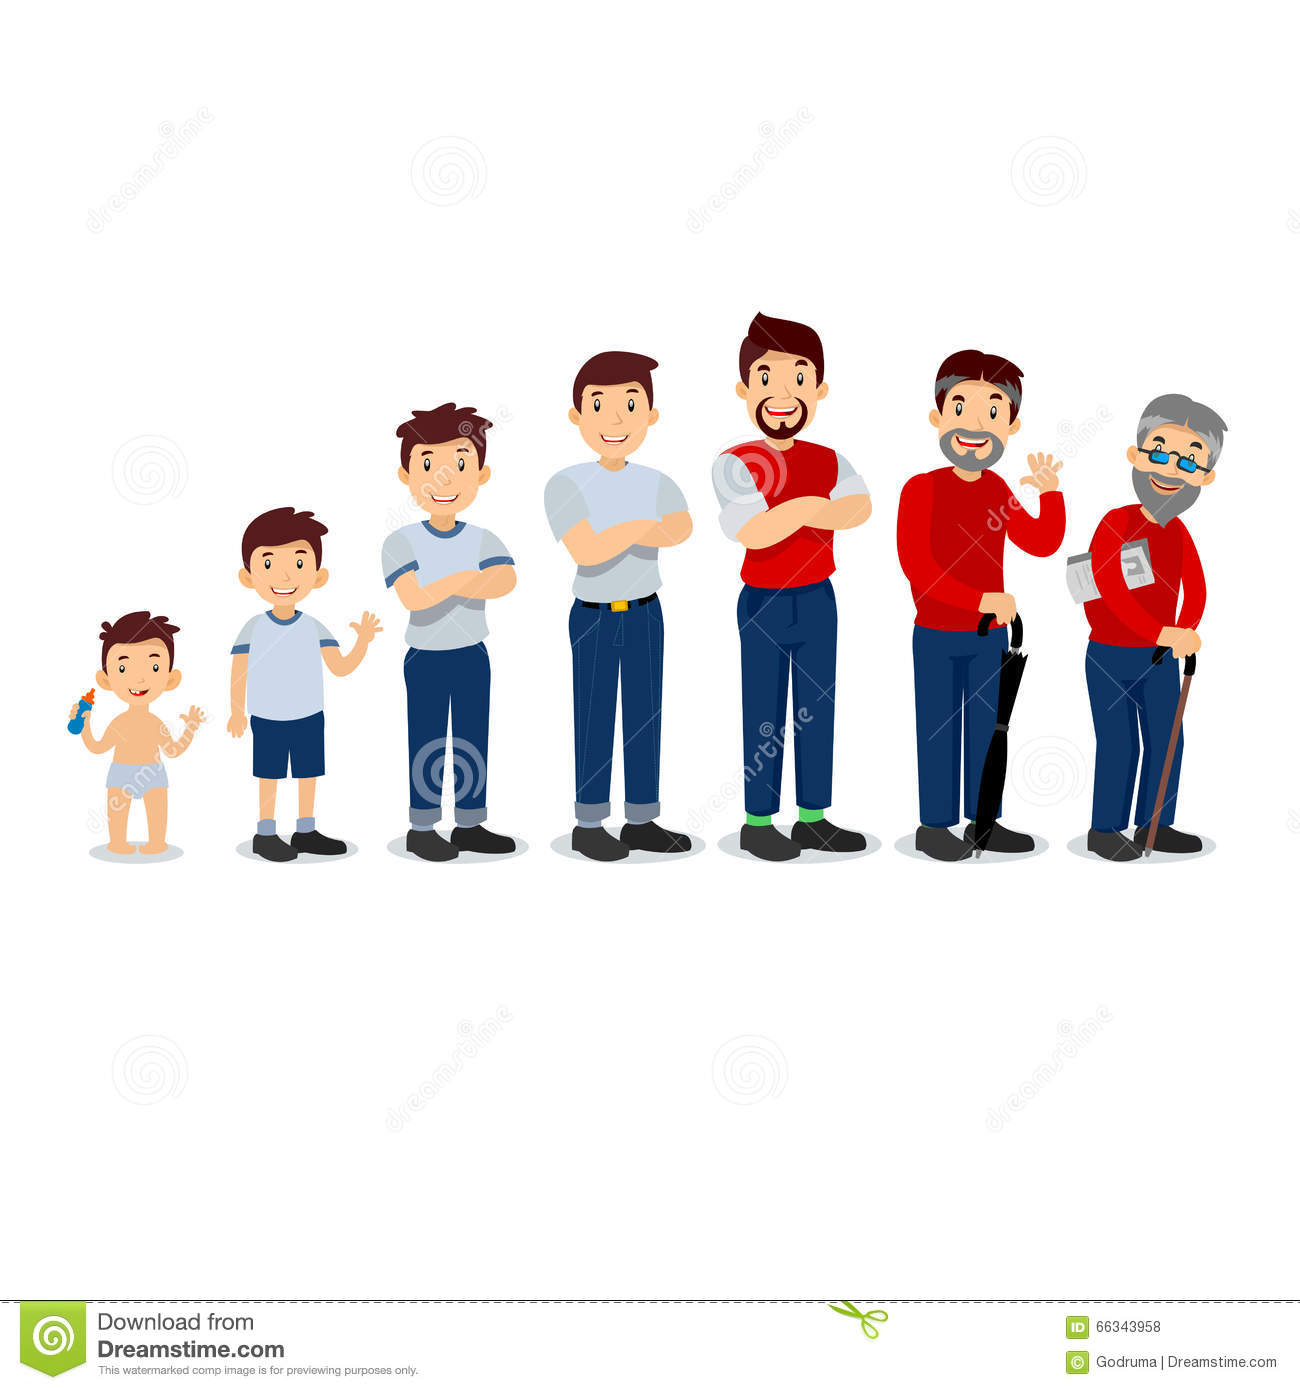 People Of All Ages Clipart.